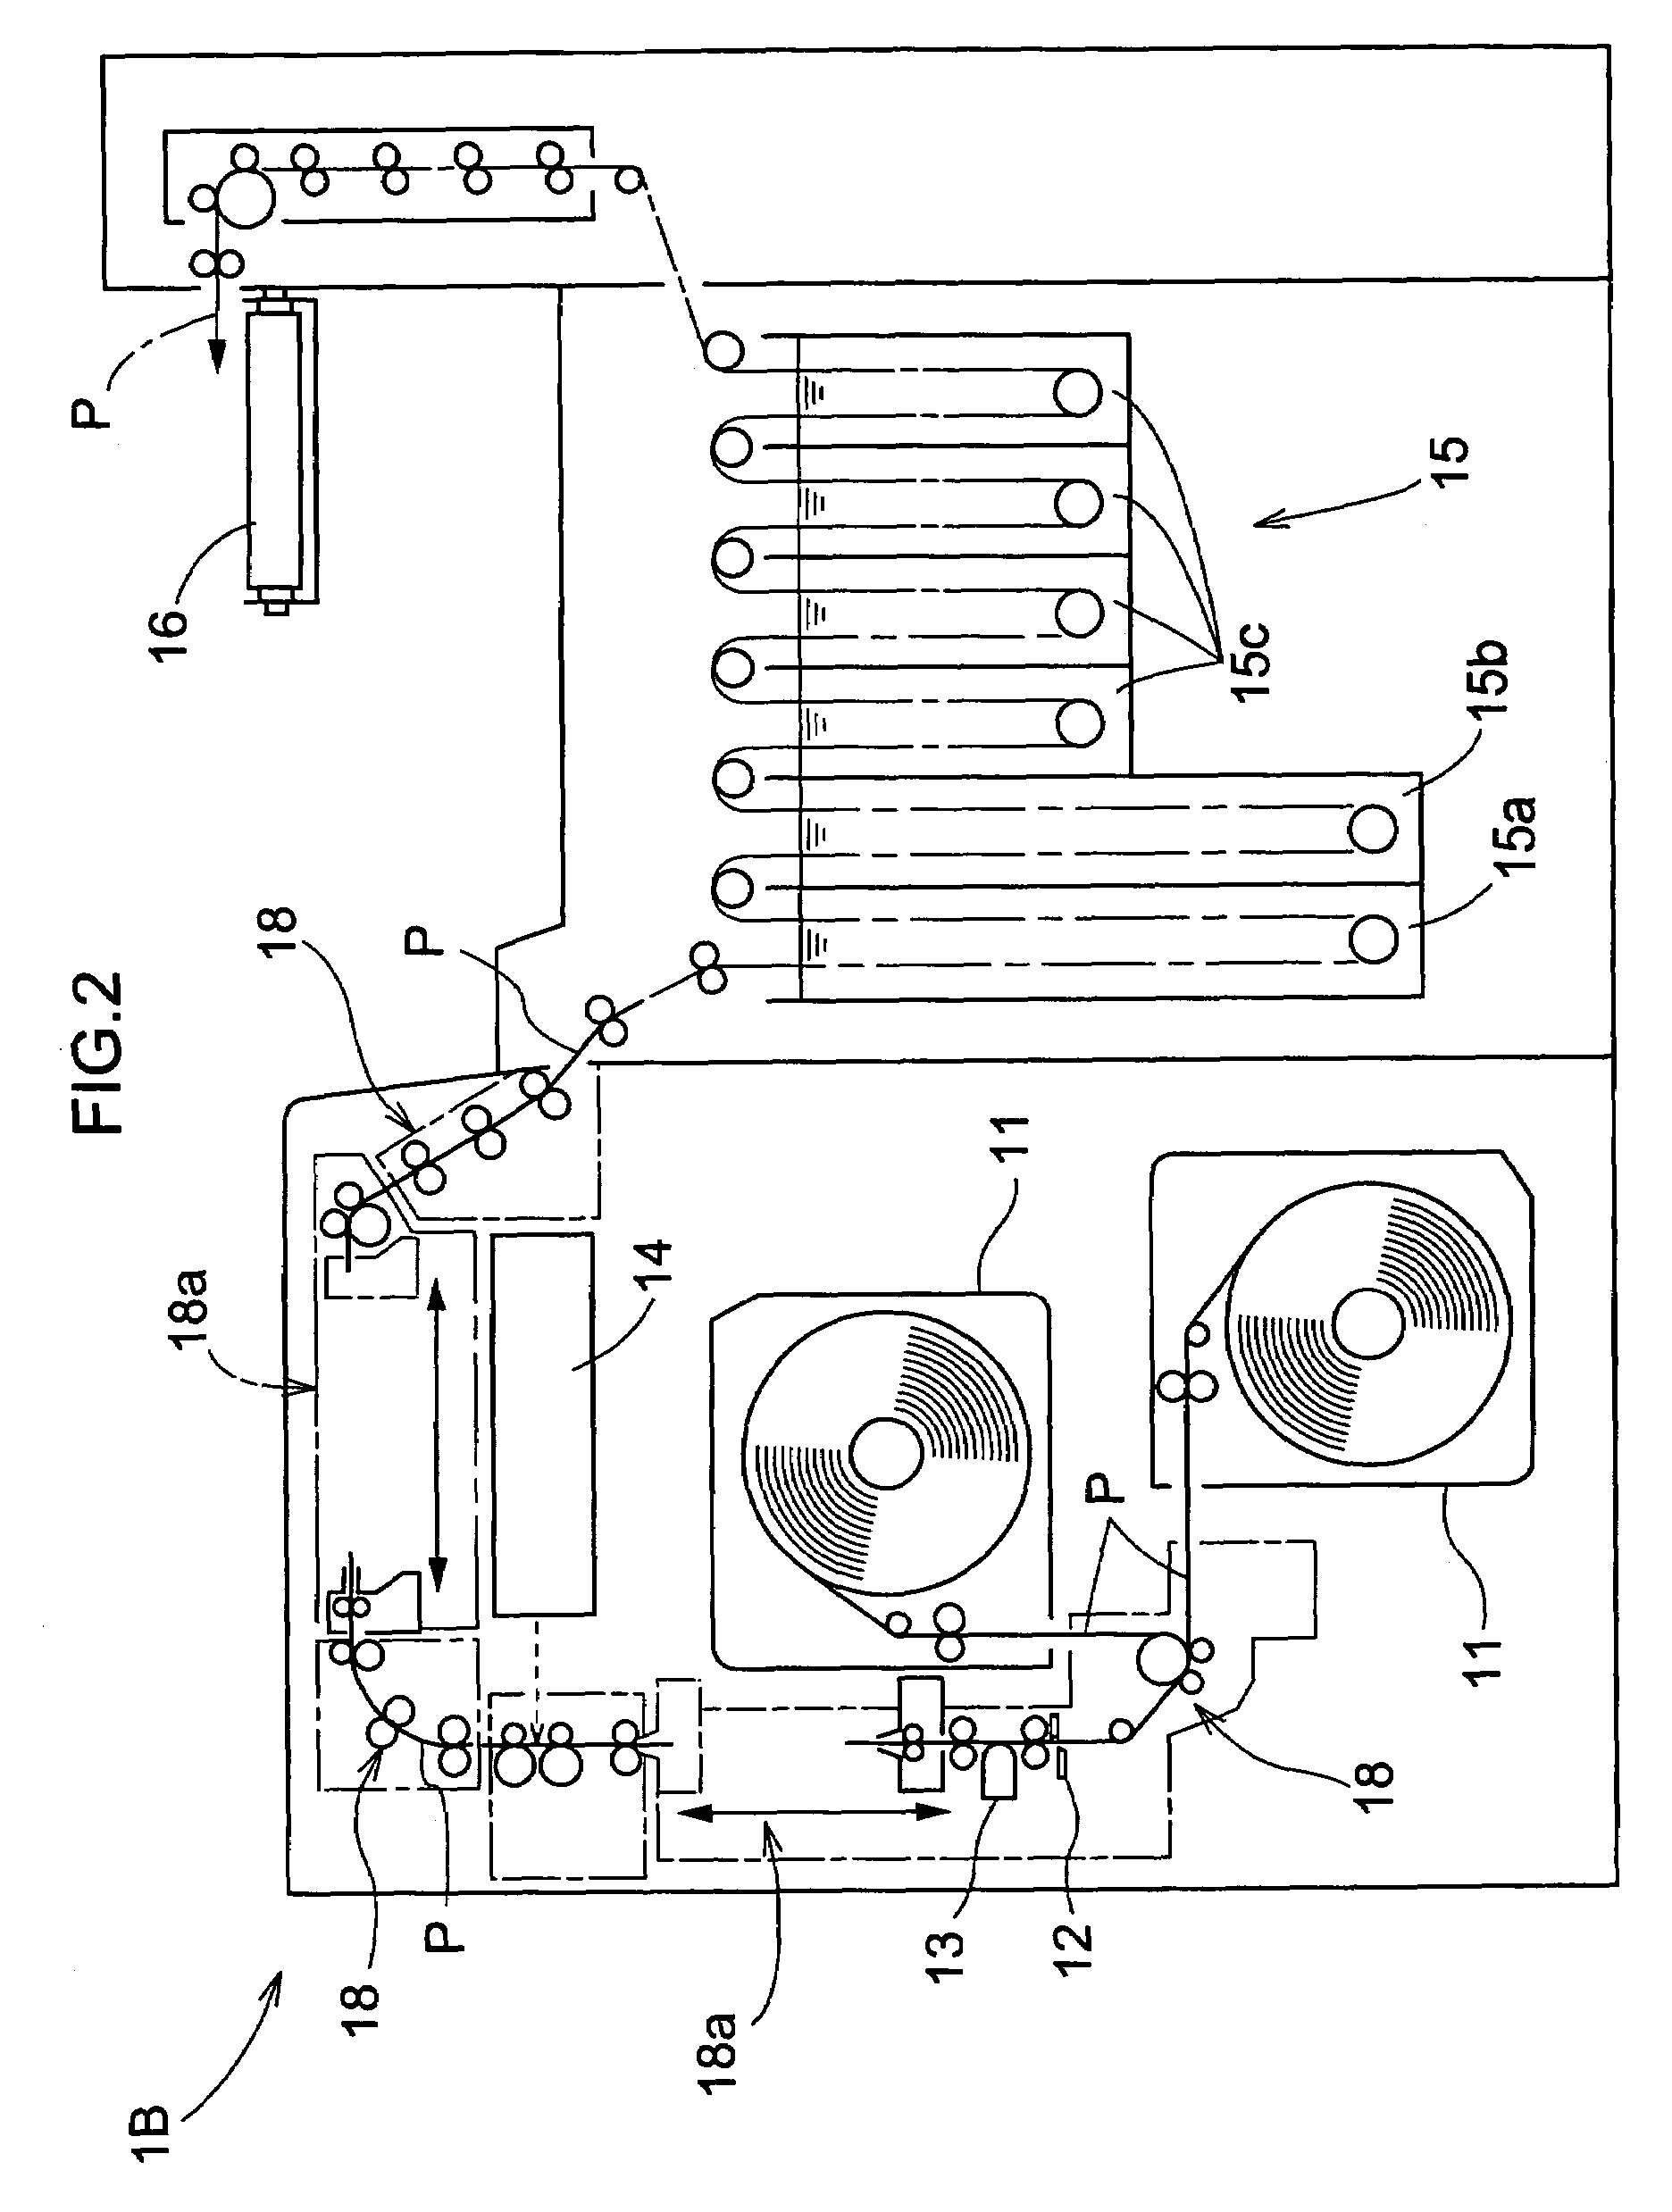 Image processing method and apparatus for red eye correction